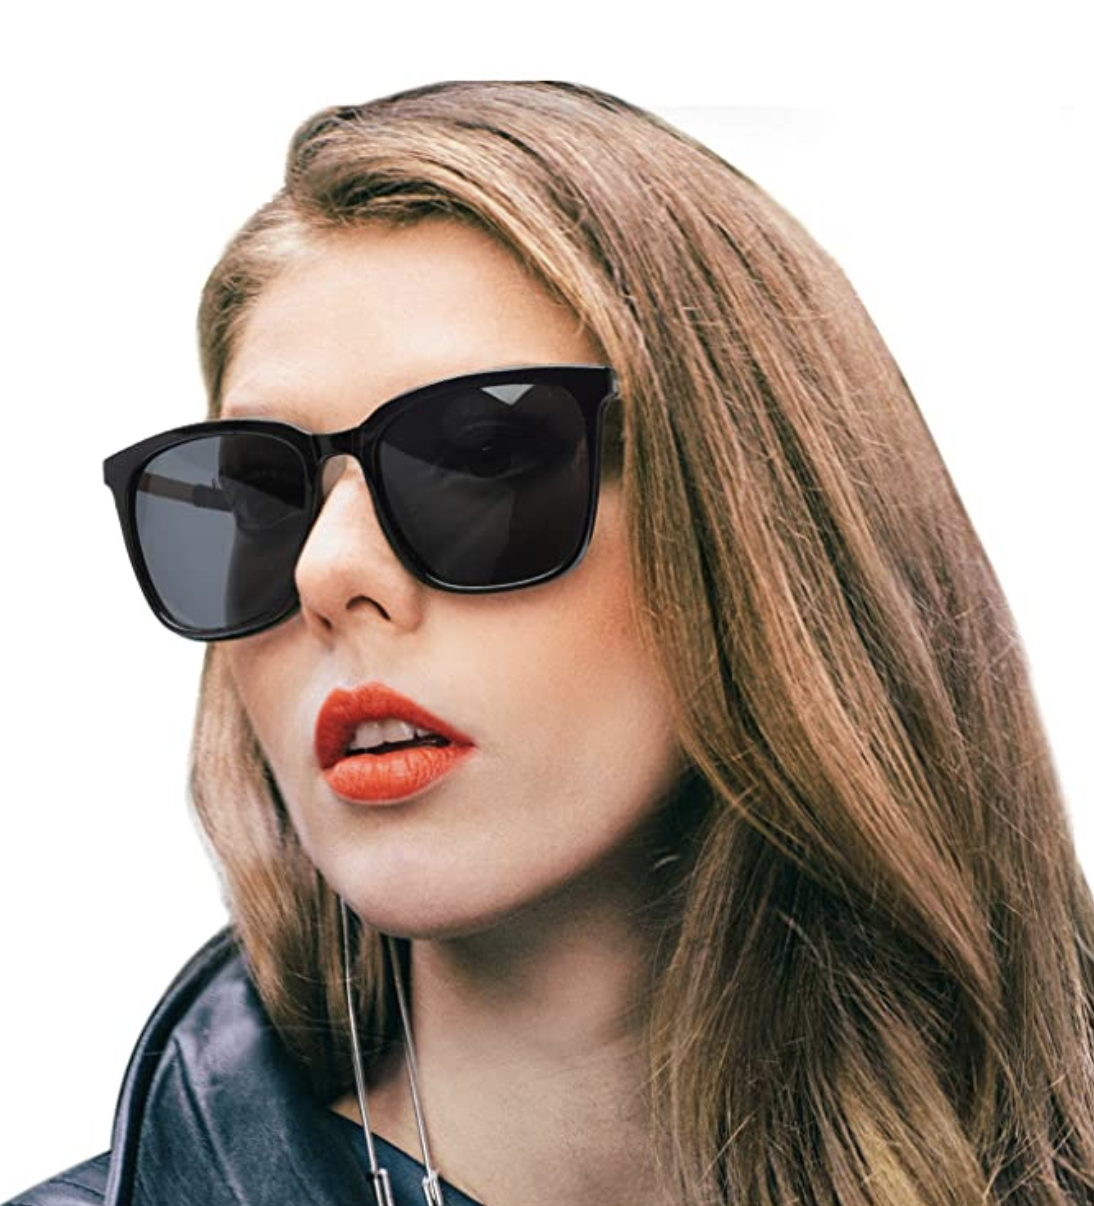 How to Find the Best Sunglasses for Your Face Shape | The Everygirl